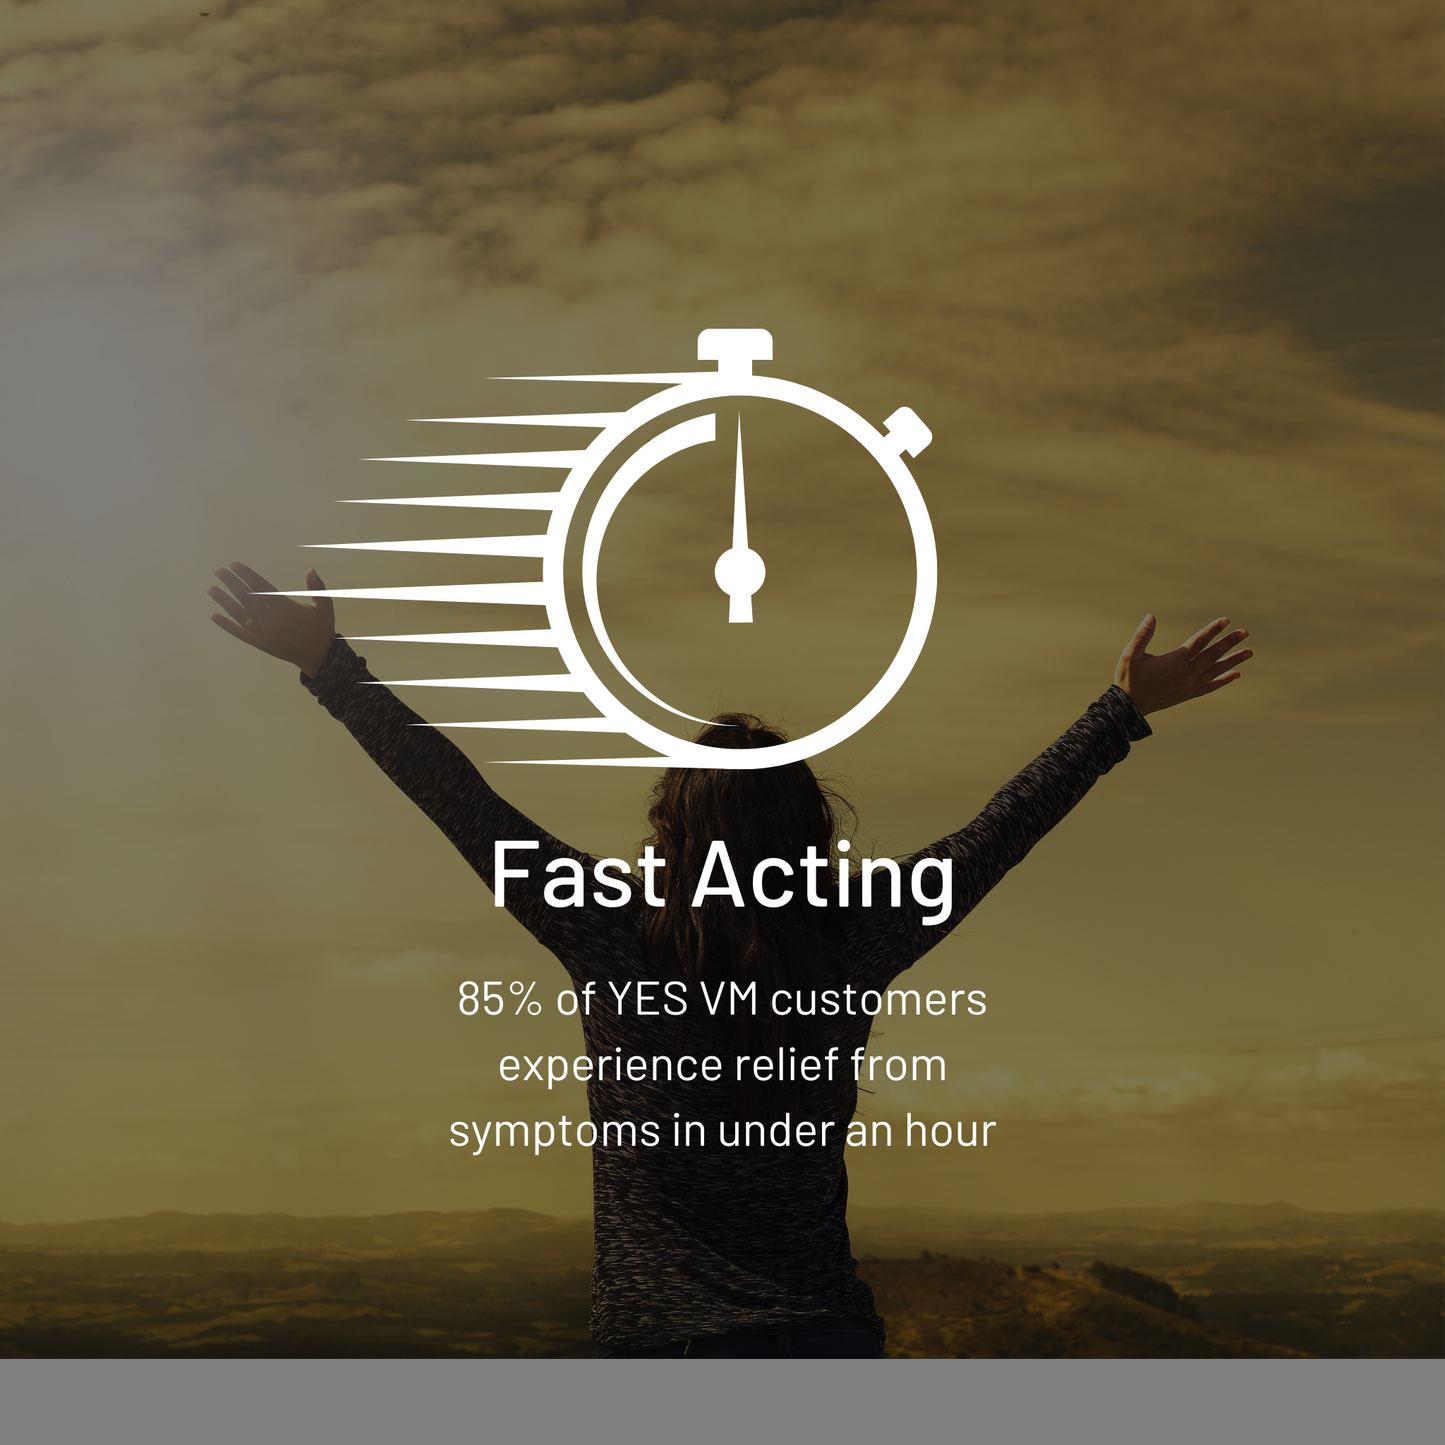 AH!YES VM fast acting.  85% of AH!YES VM customers experience relief from symptoms in under an hour.